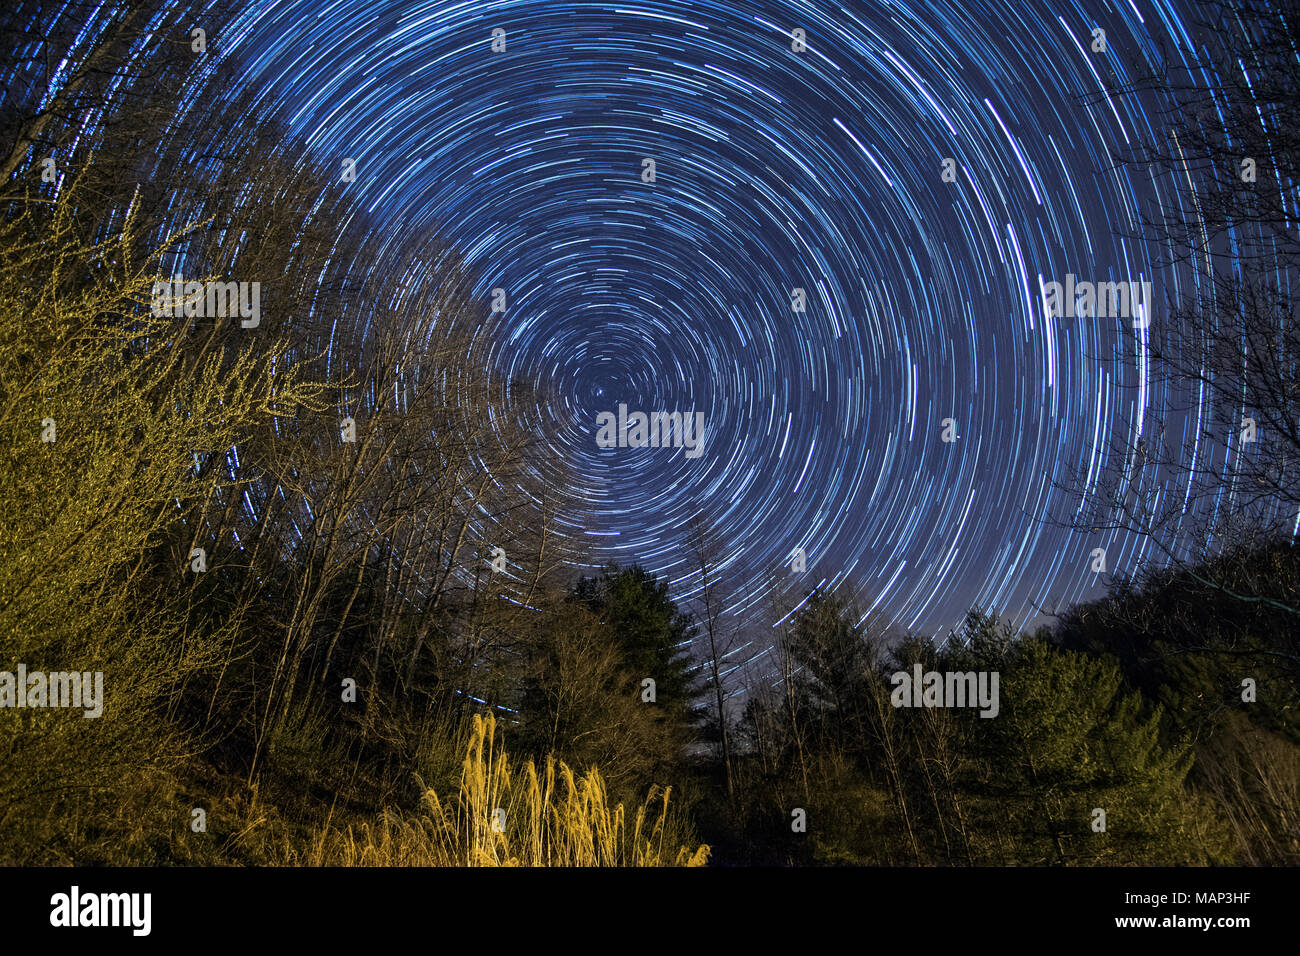 Green trees contrast against the night sky in this star trails scene. Stock Photo